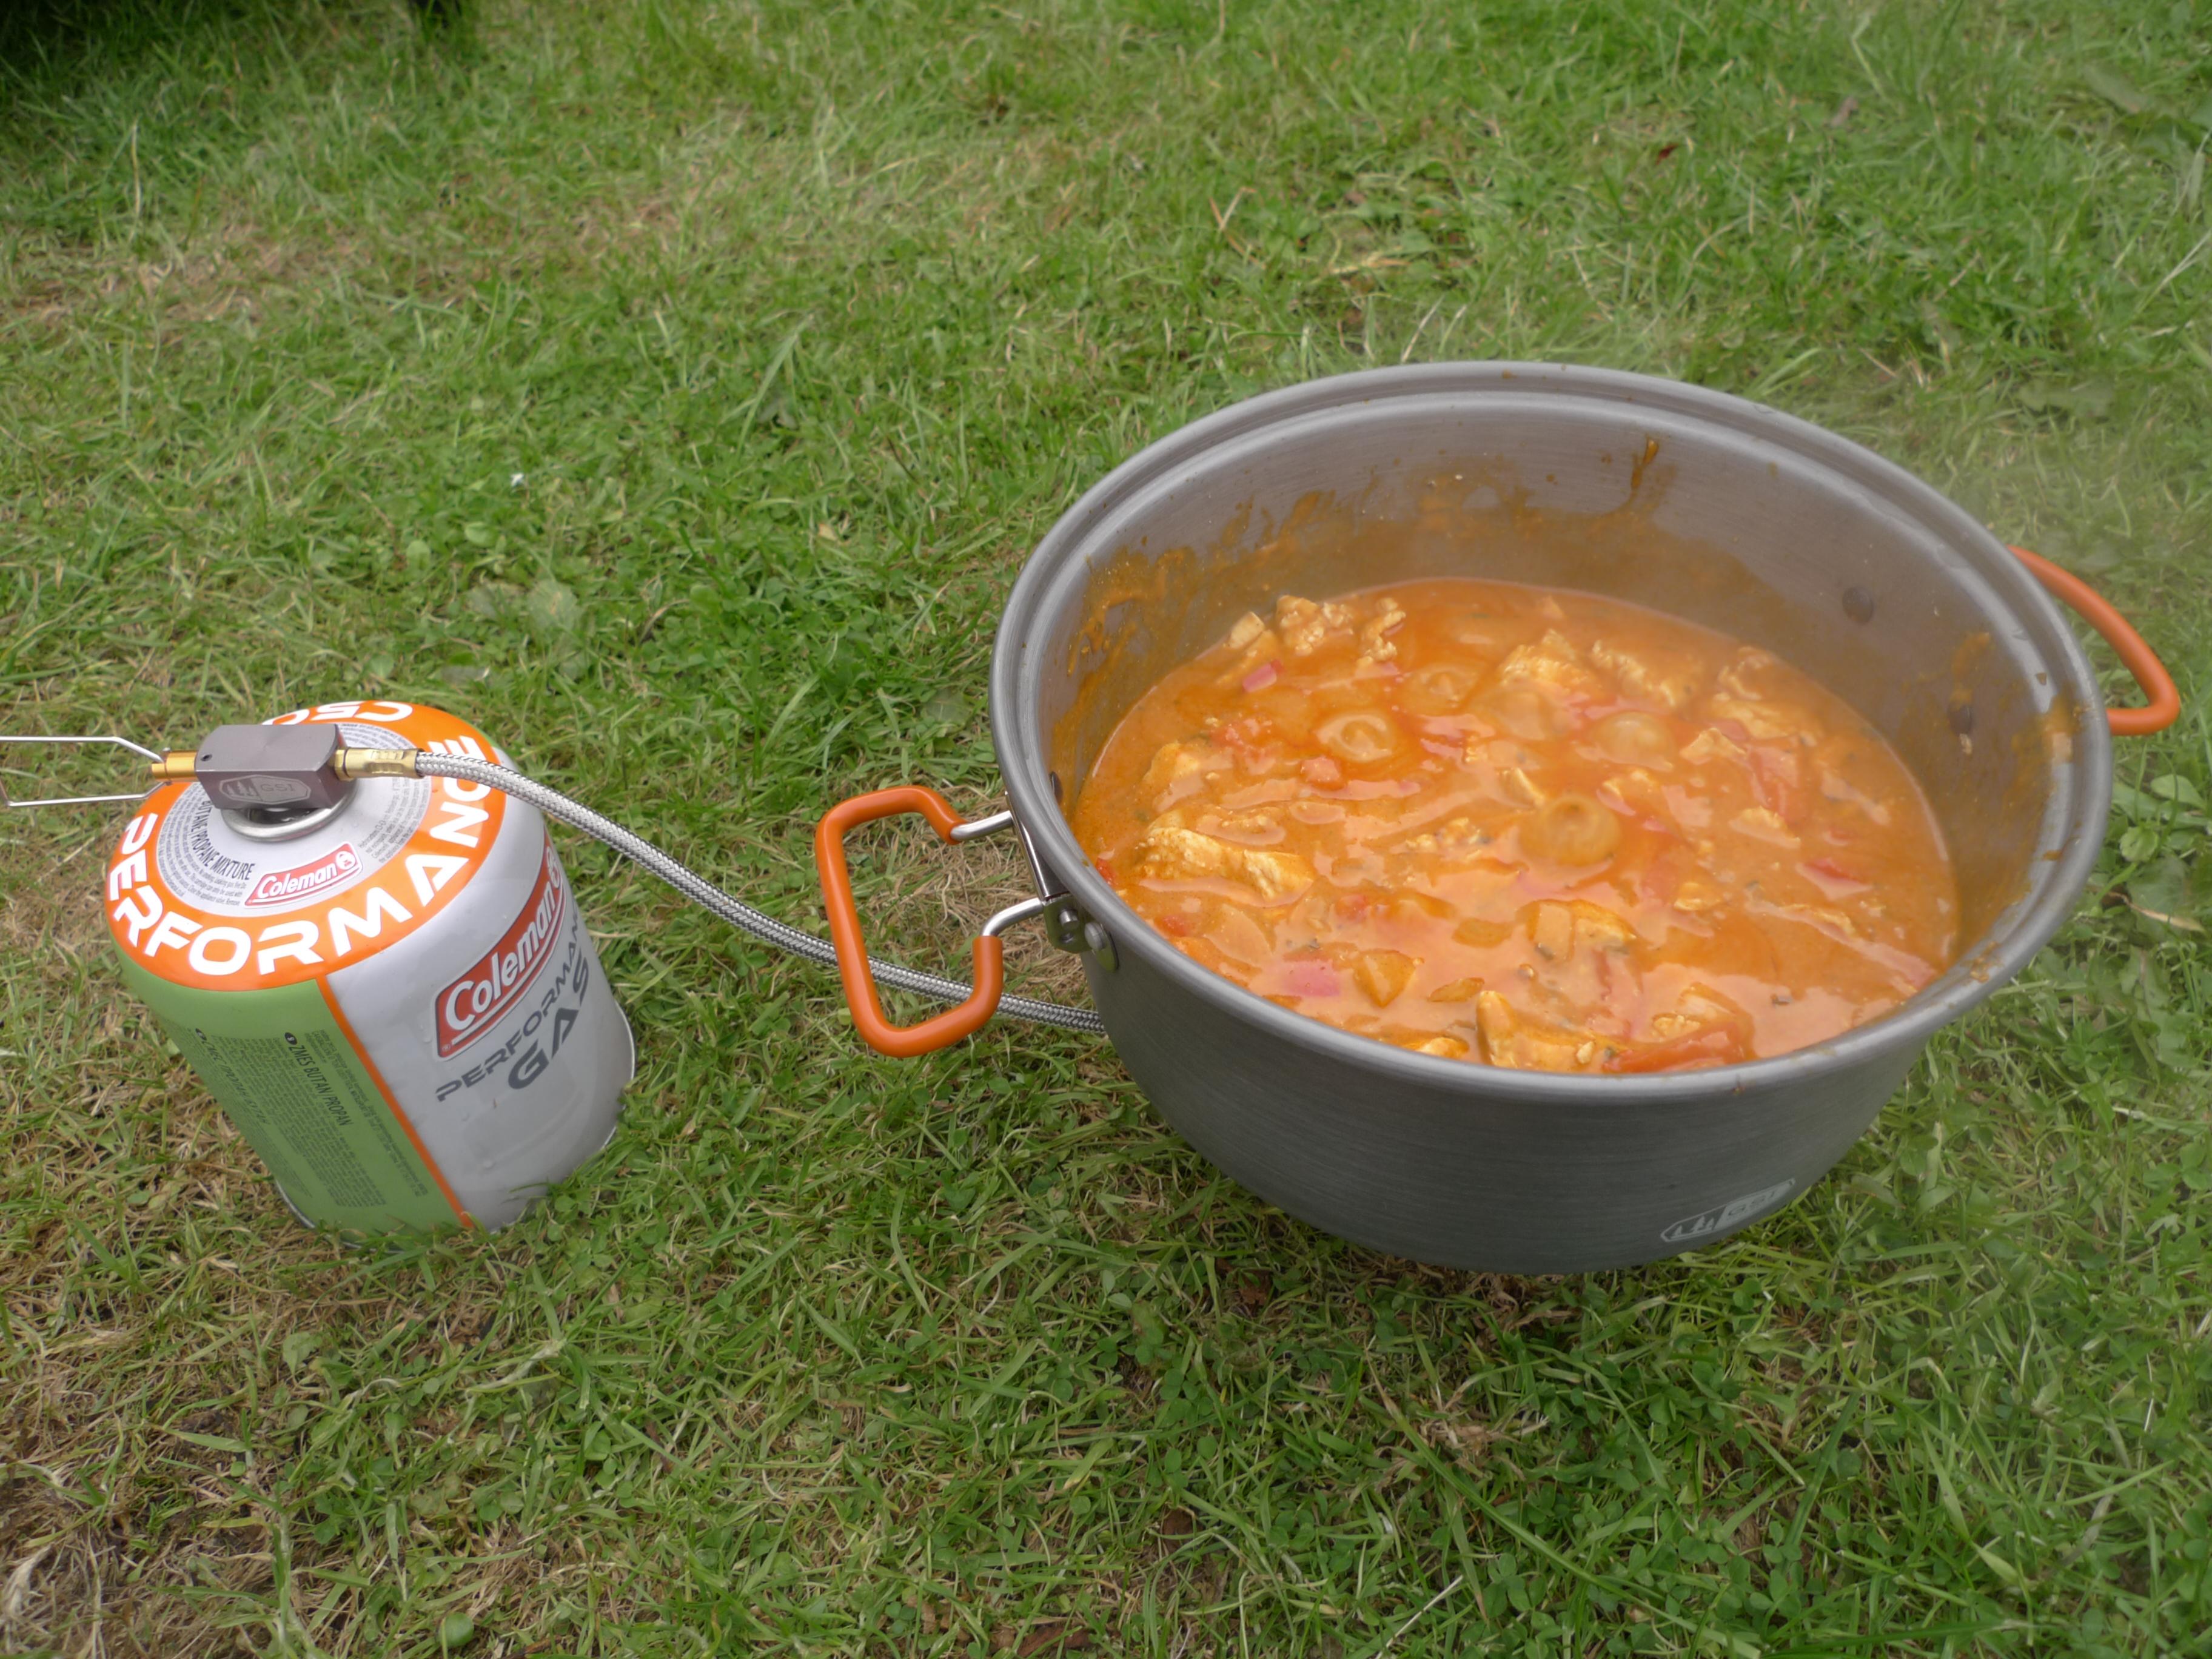 Cooking camping supper on a GSI Pinnacle 4 Season Stove in a GSI Hallulite 3.2L pot